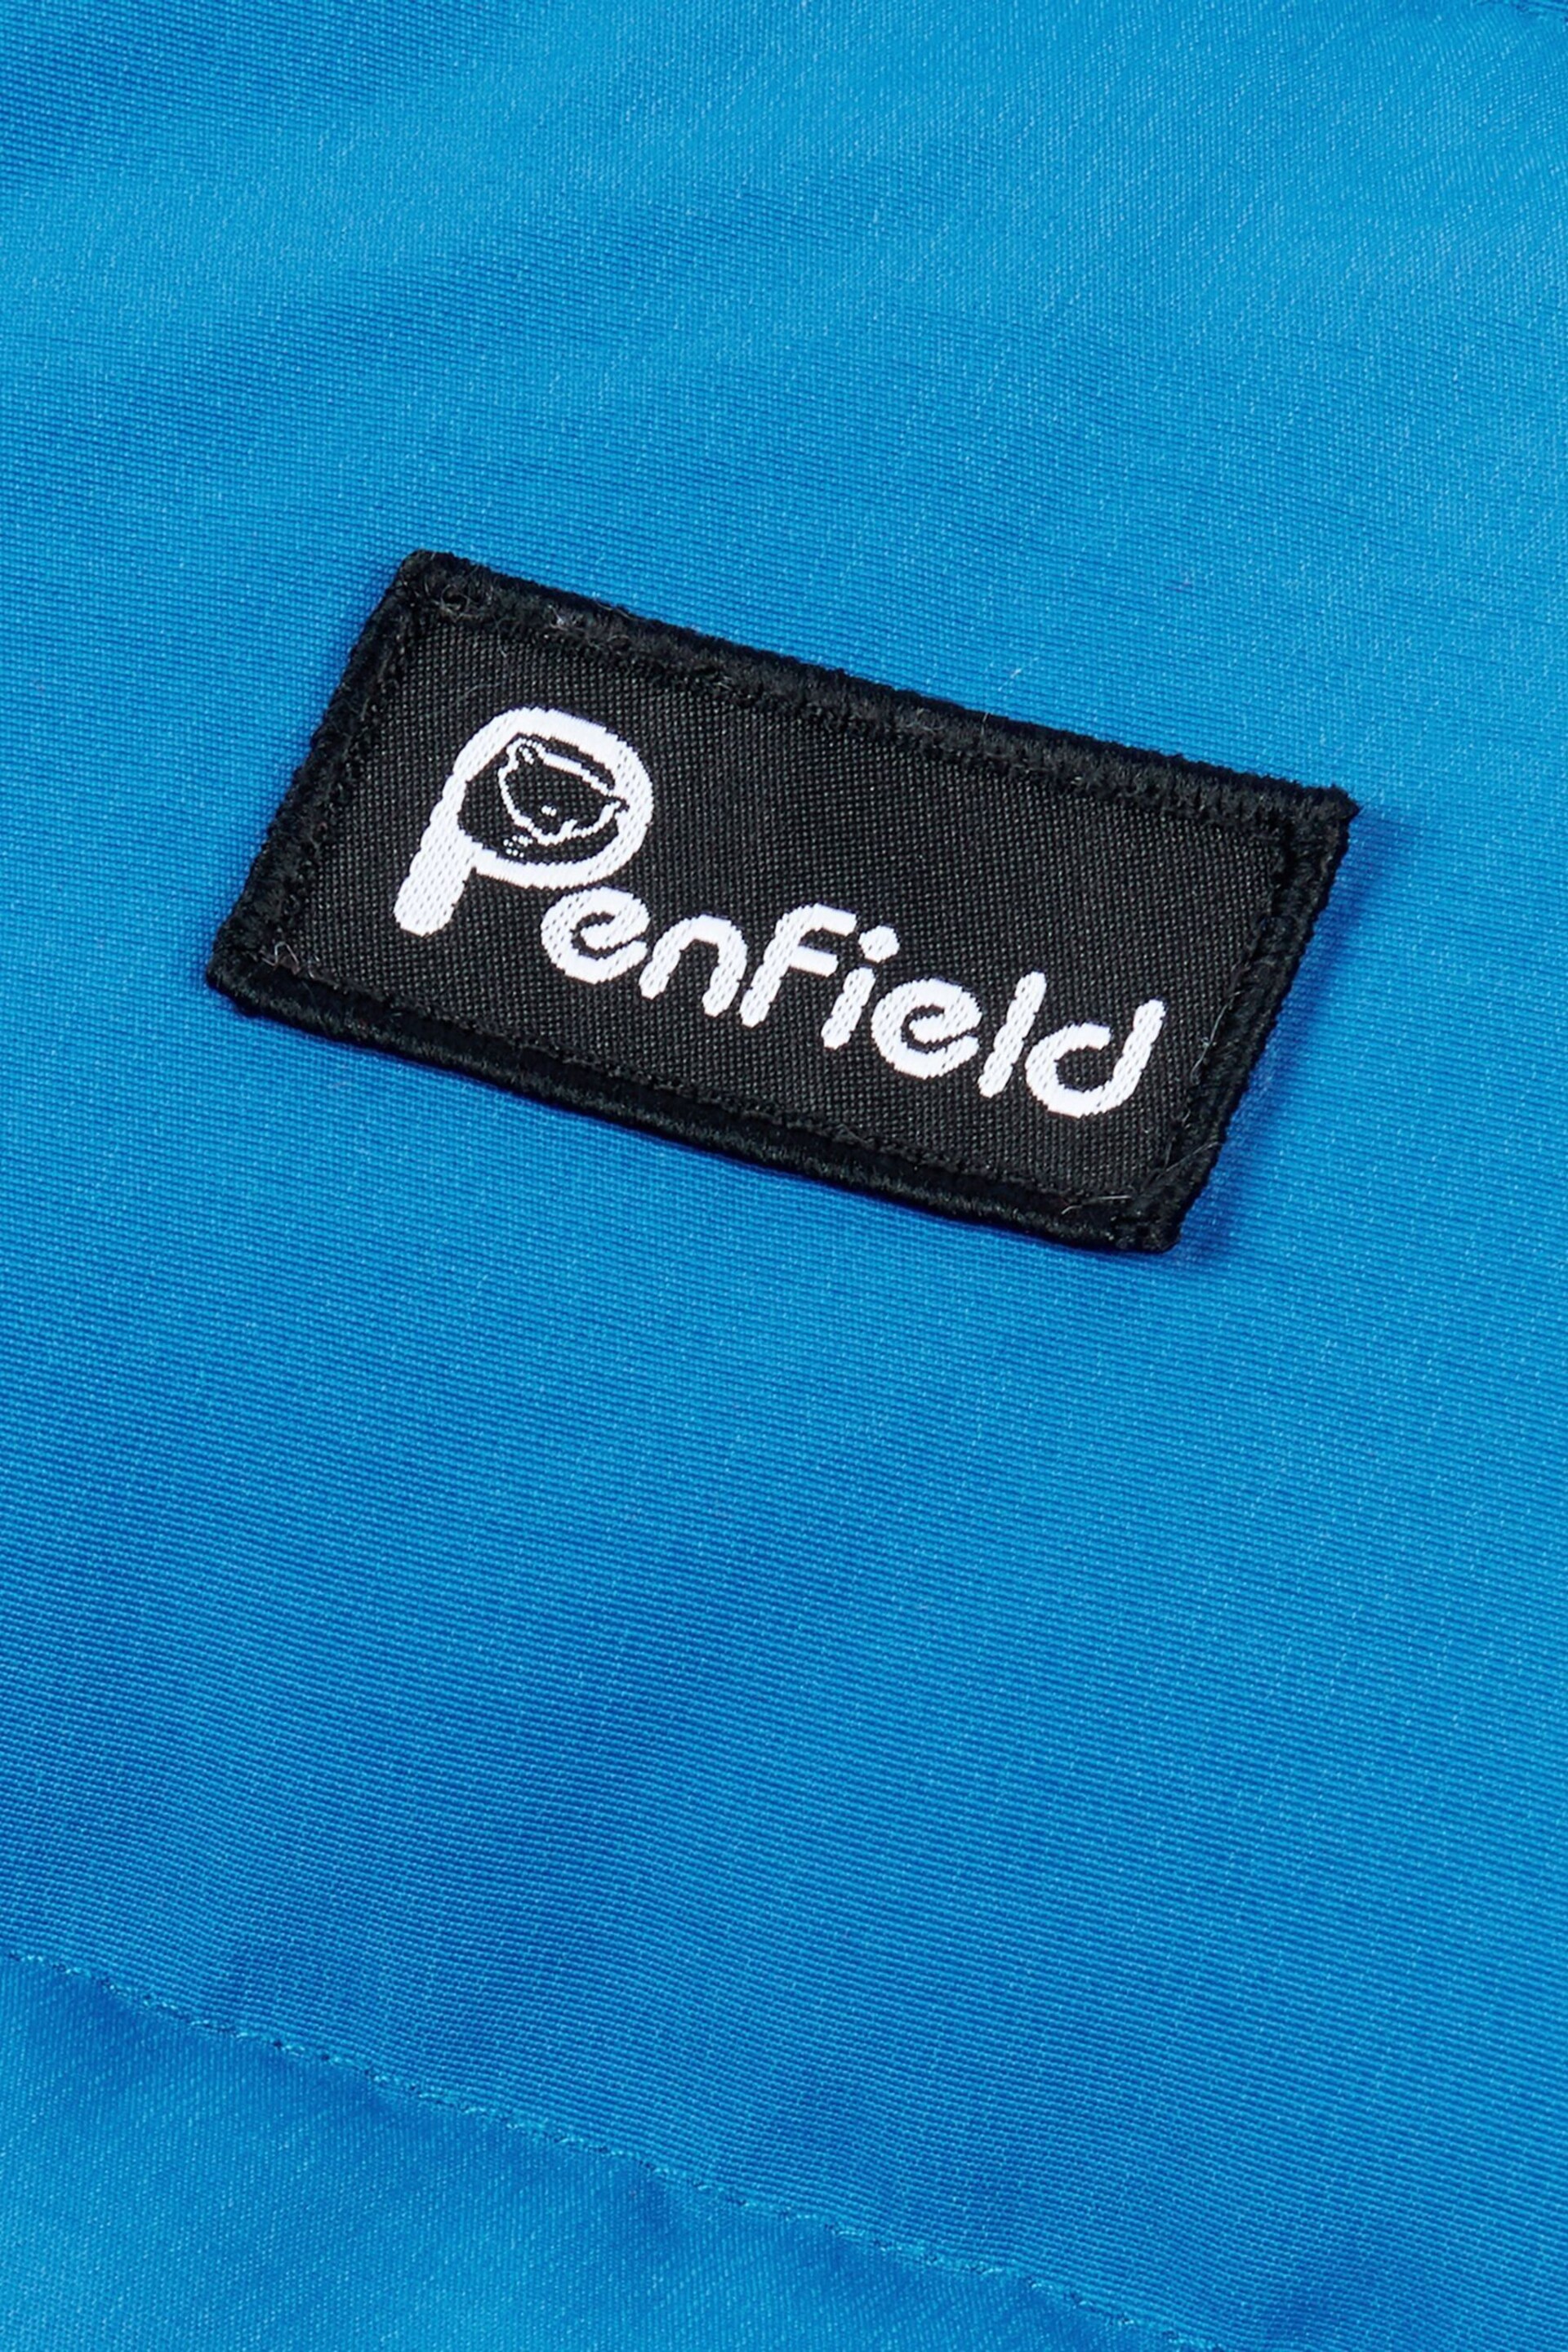 Penfield Blue Outback Gilet - Image 9 of 9